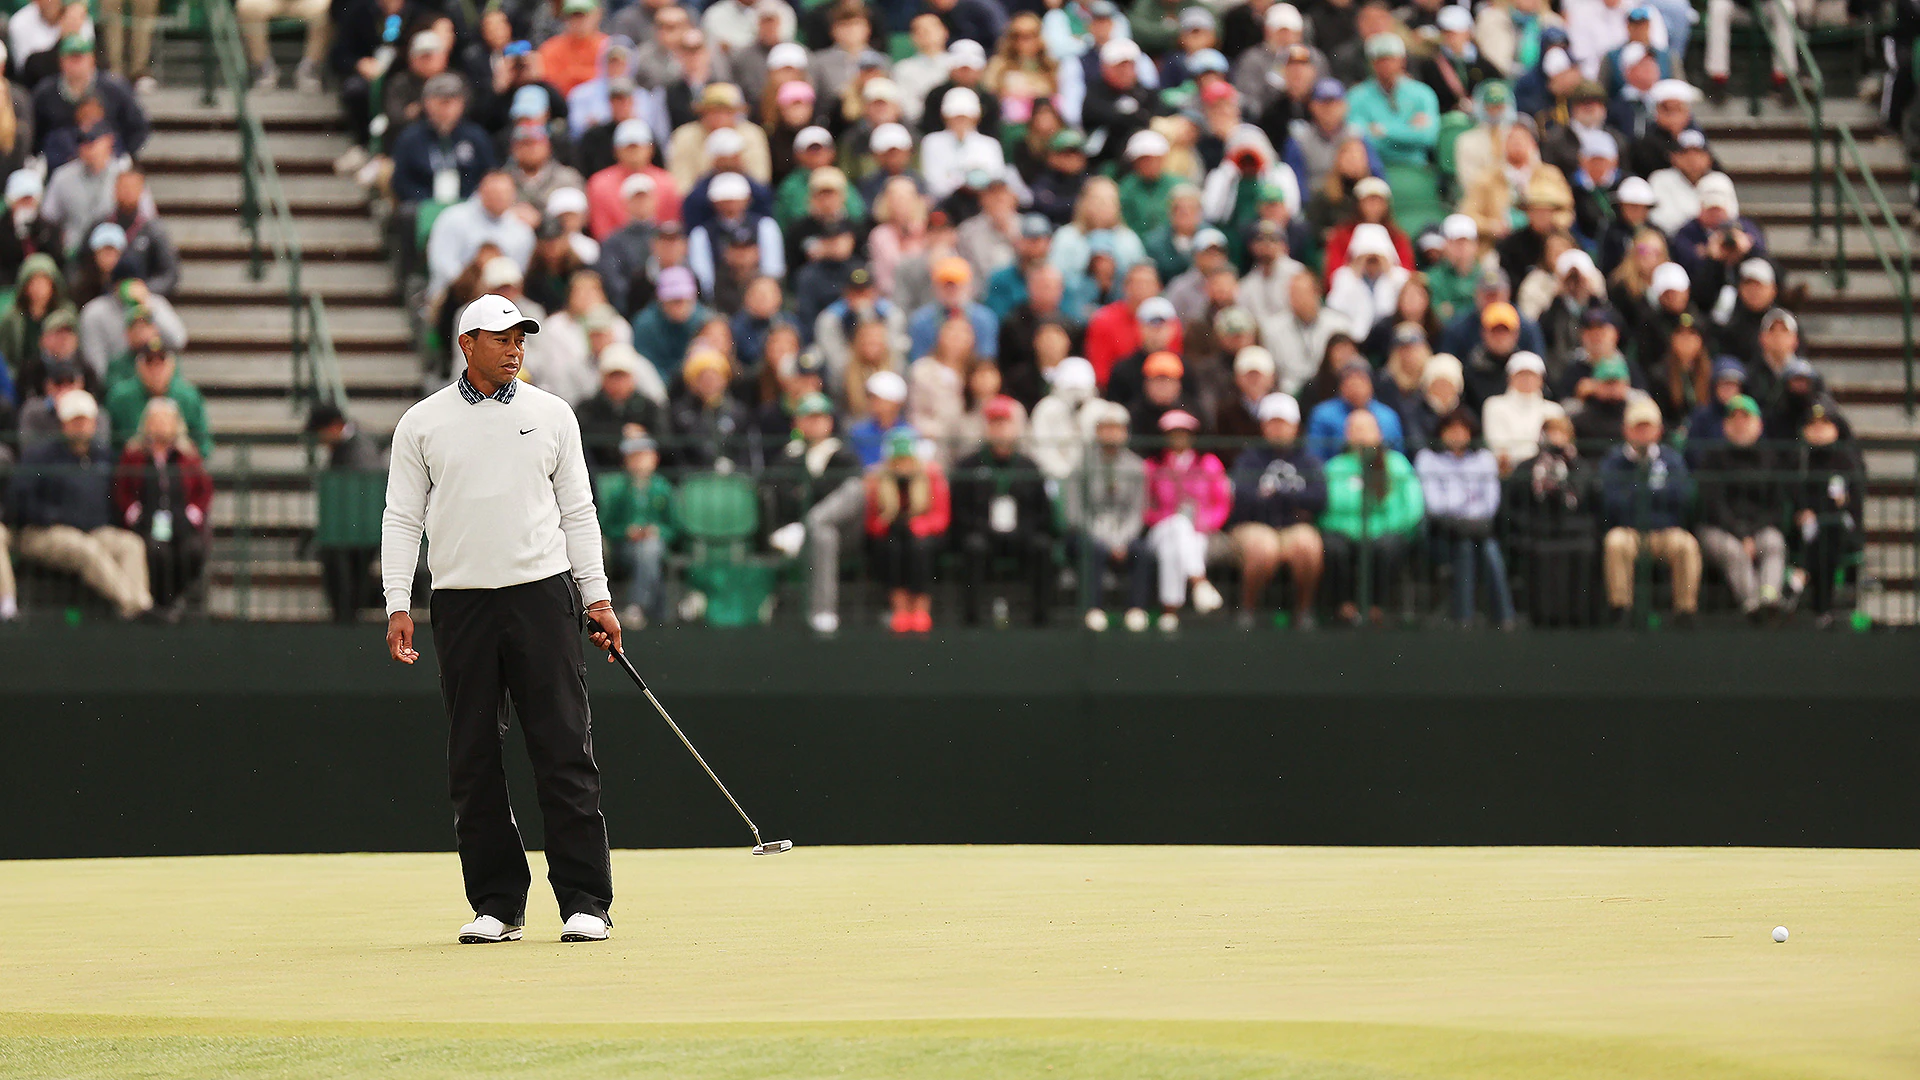 2022 Masters: Tiger Woods after 78: ‘I hit a thousand putts out there’